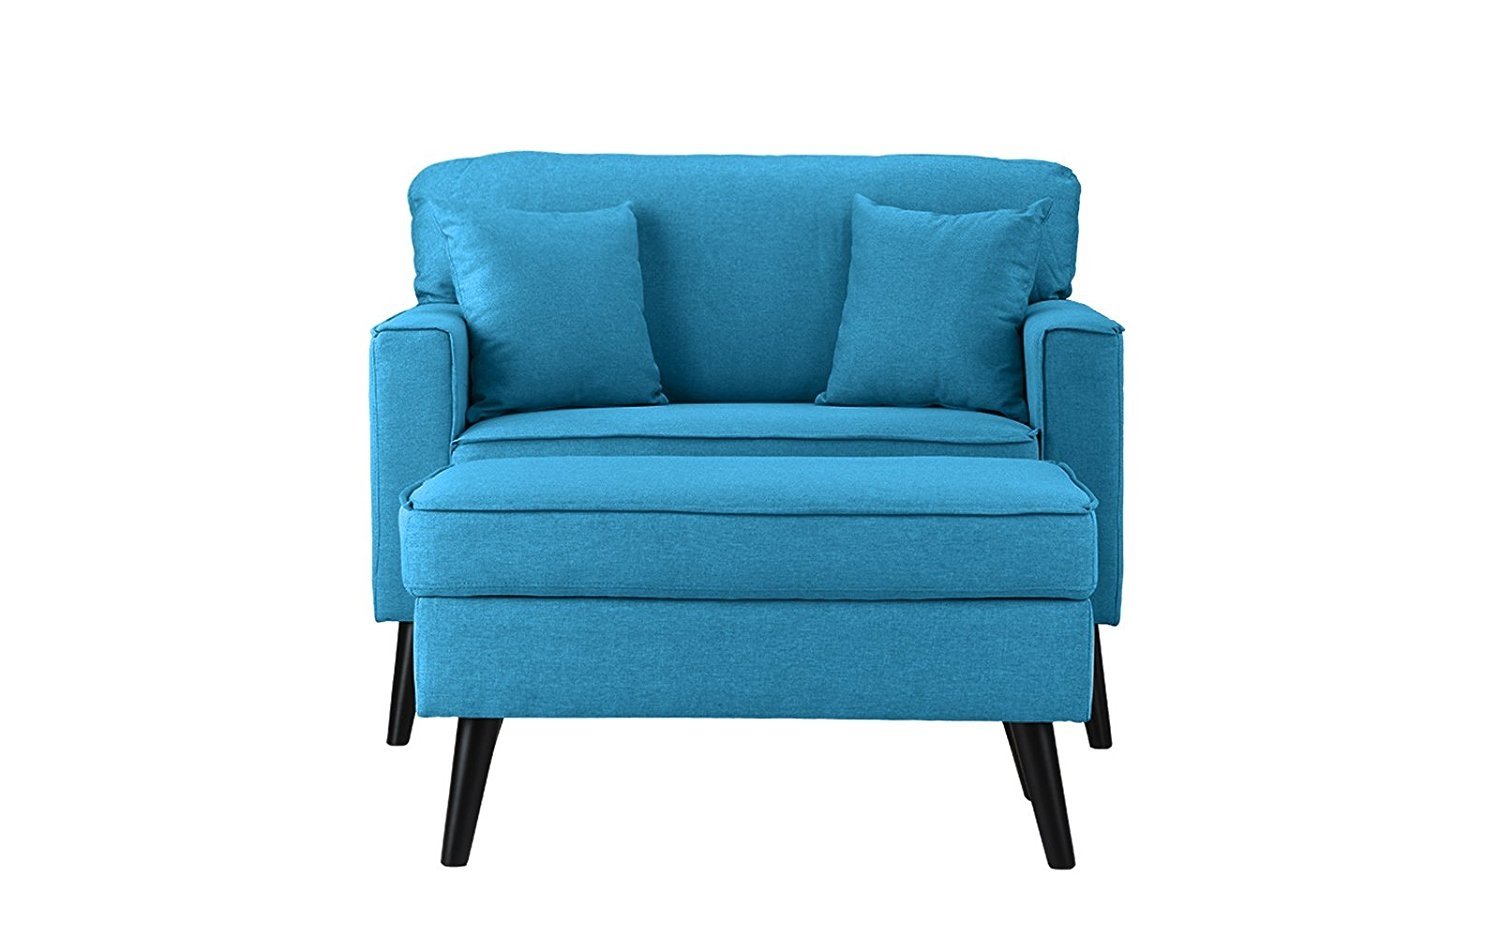 Modern Living Room Chair With Ottoman